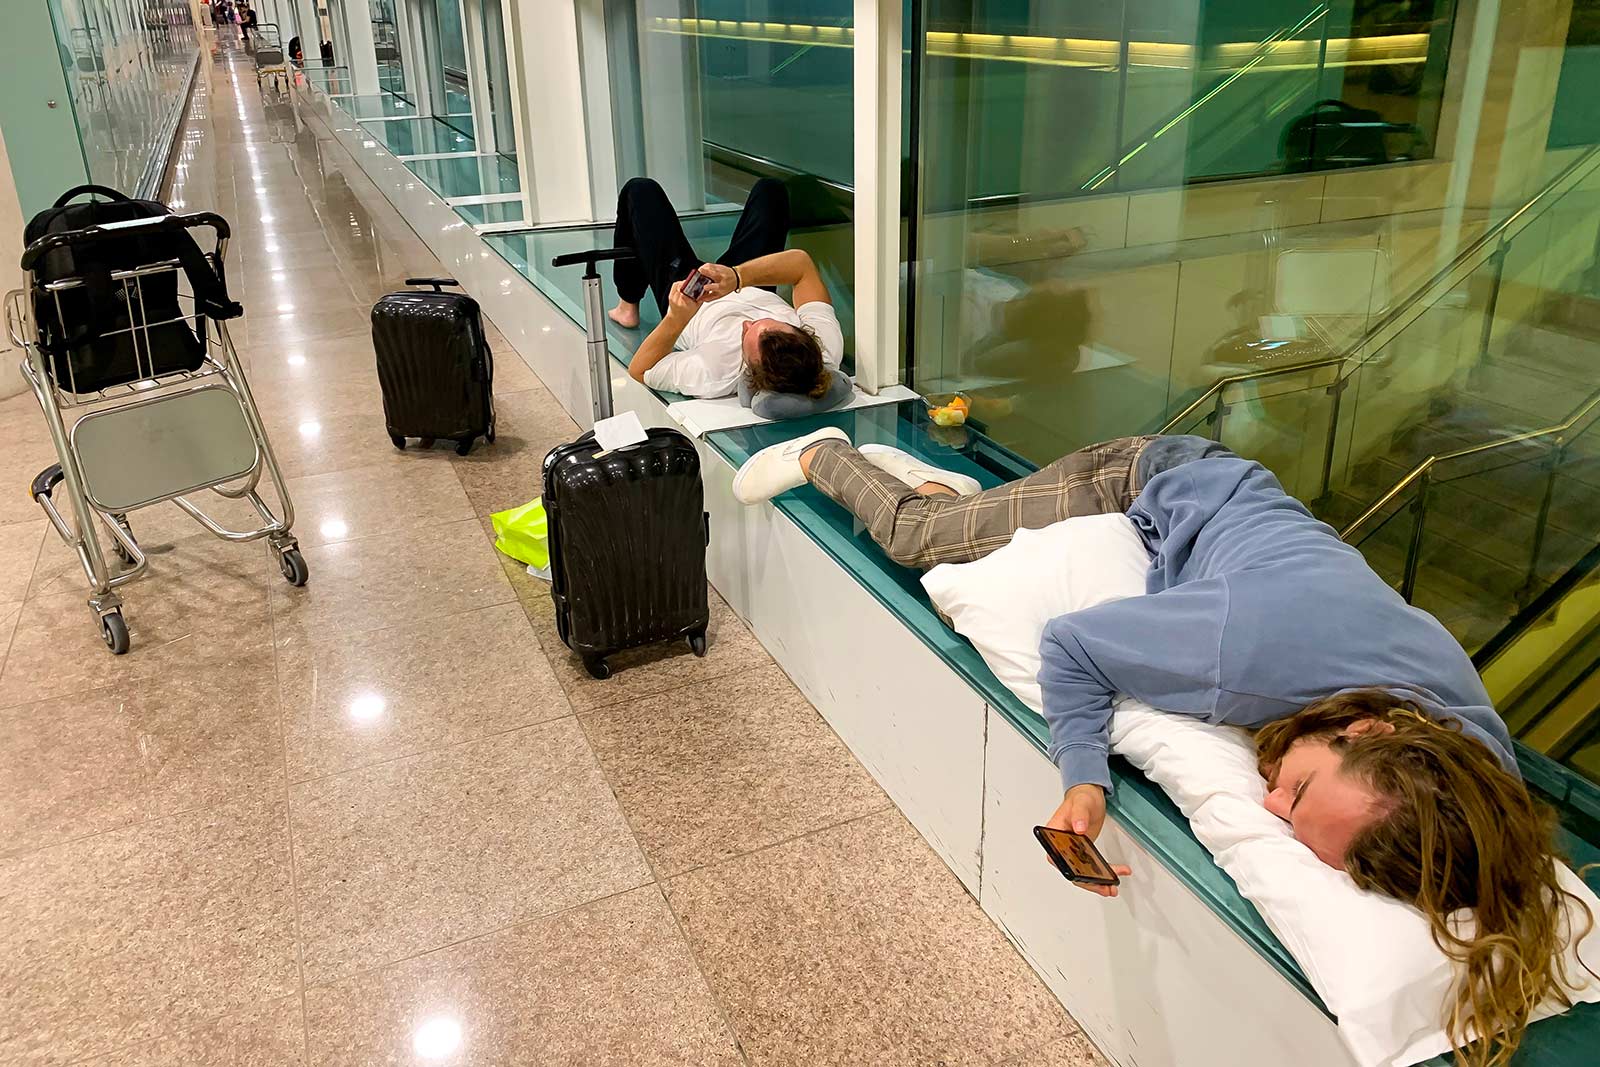 global outage makes people sleep on airports